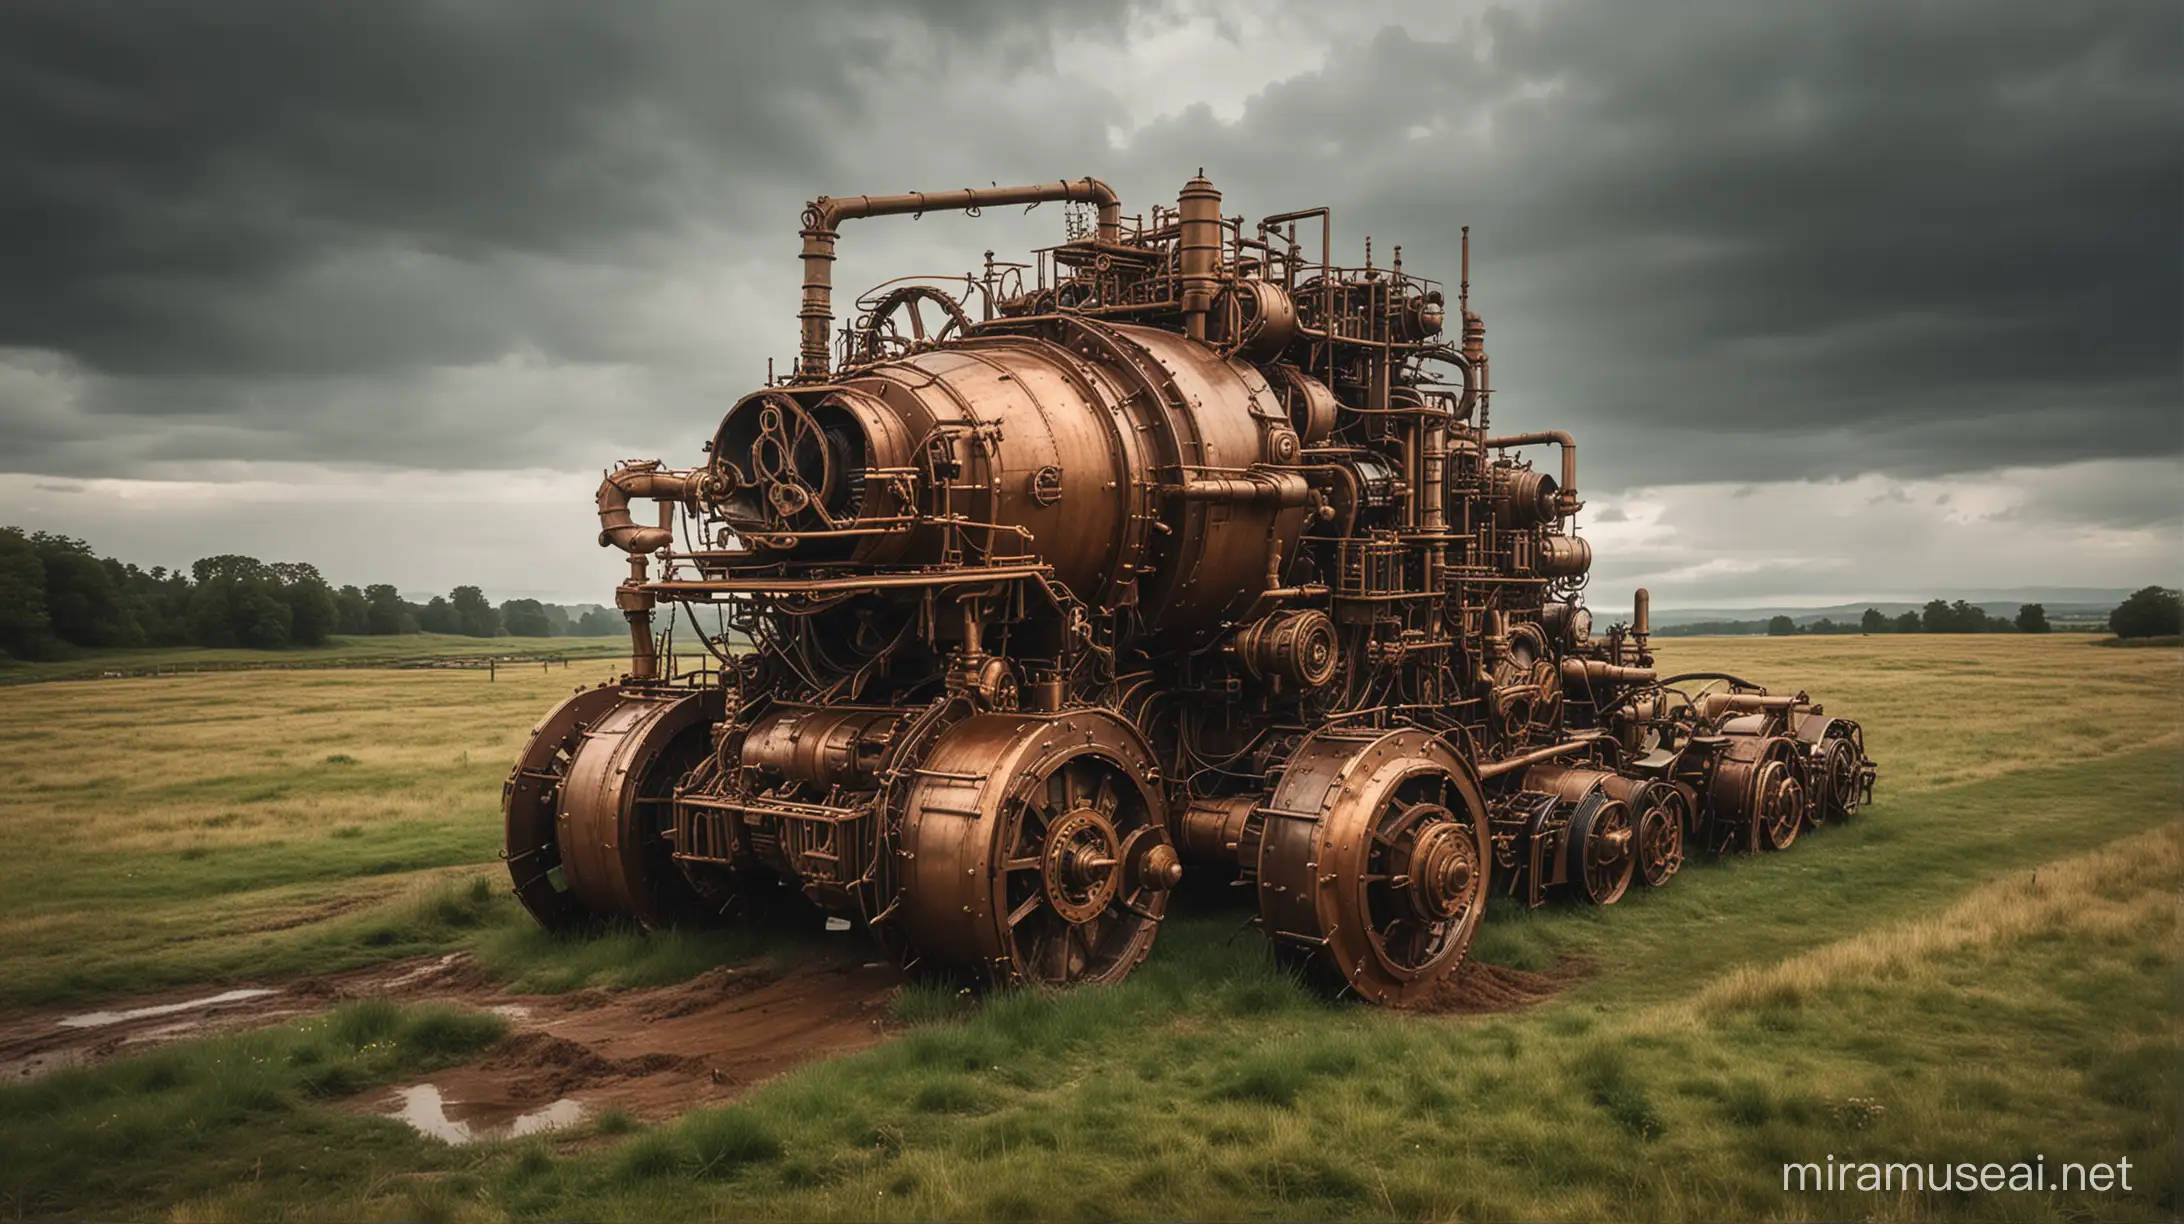 Steampunk Excavation Machine in a Meadow